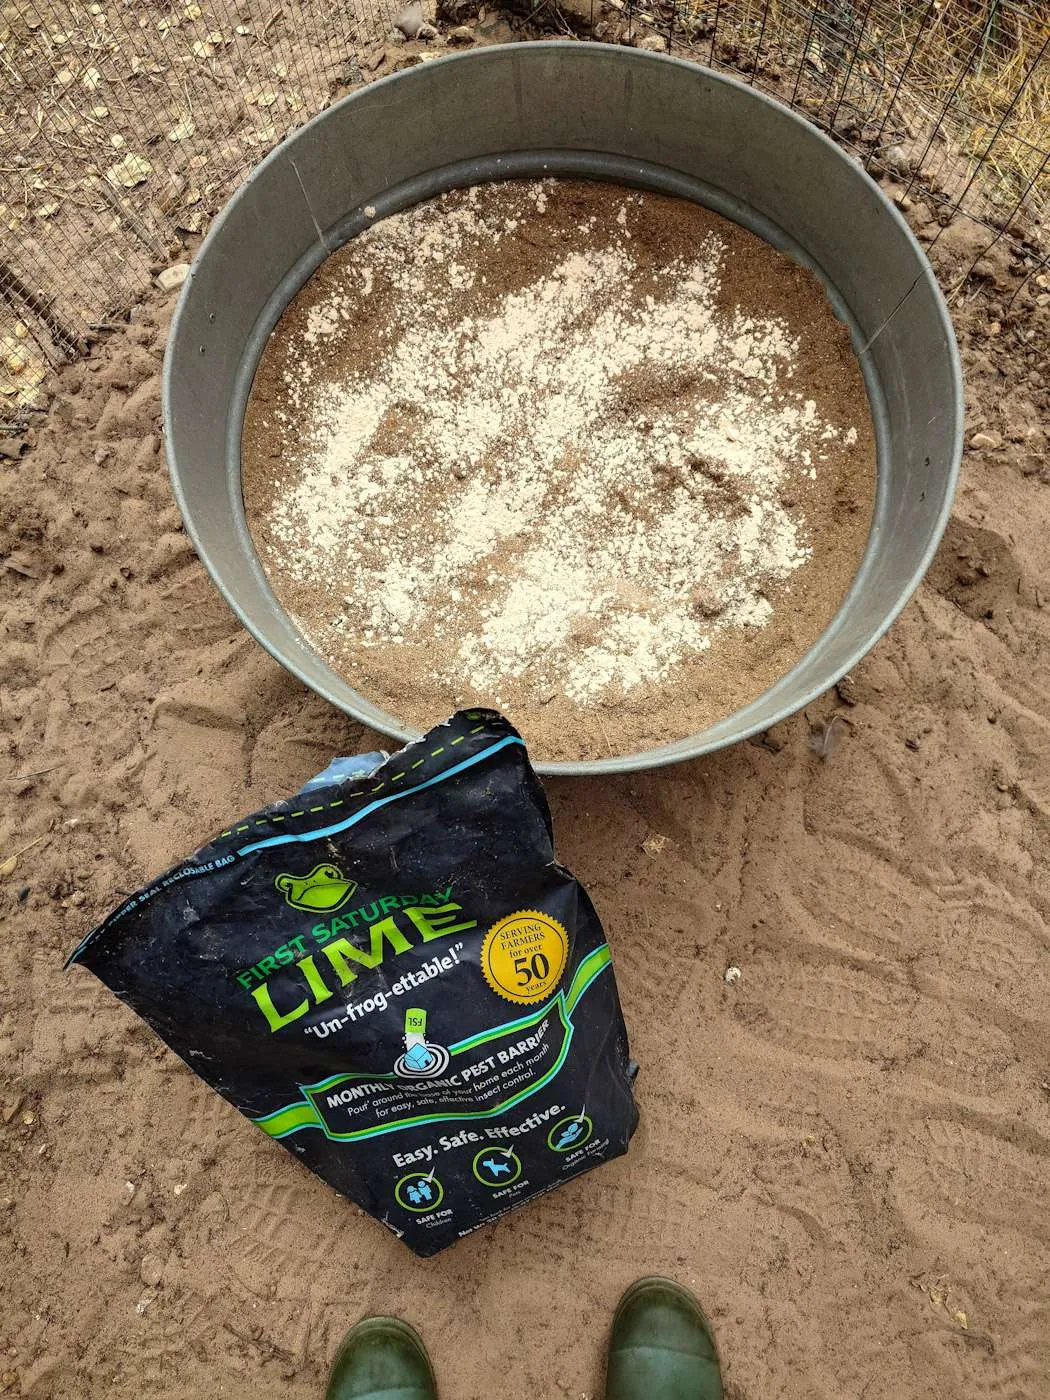 A metal tub is full of dirt and sand with a sprinkle of lime on top which will be mixed into the soil and sand. The bag of lime sits just outside the tub to illustrate the brand of lime used. 